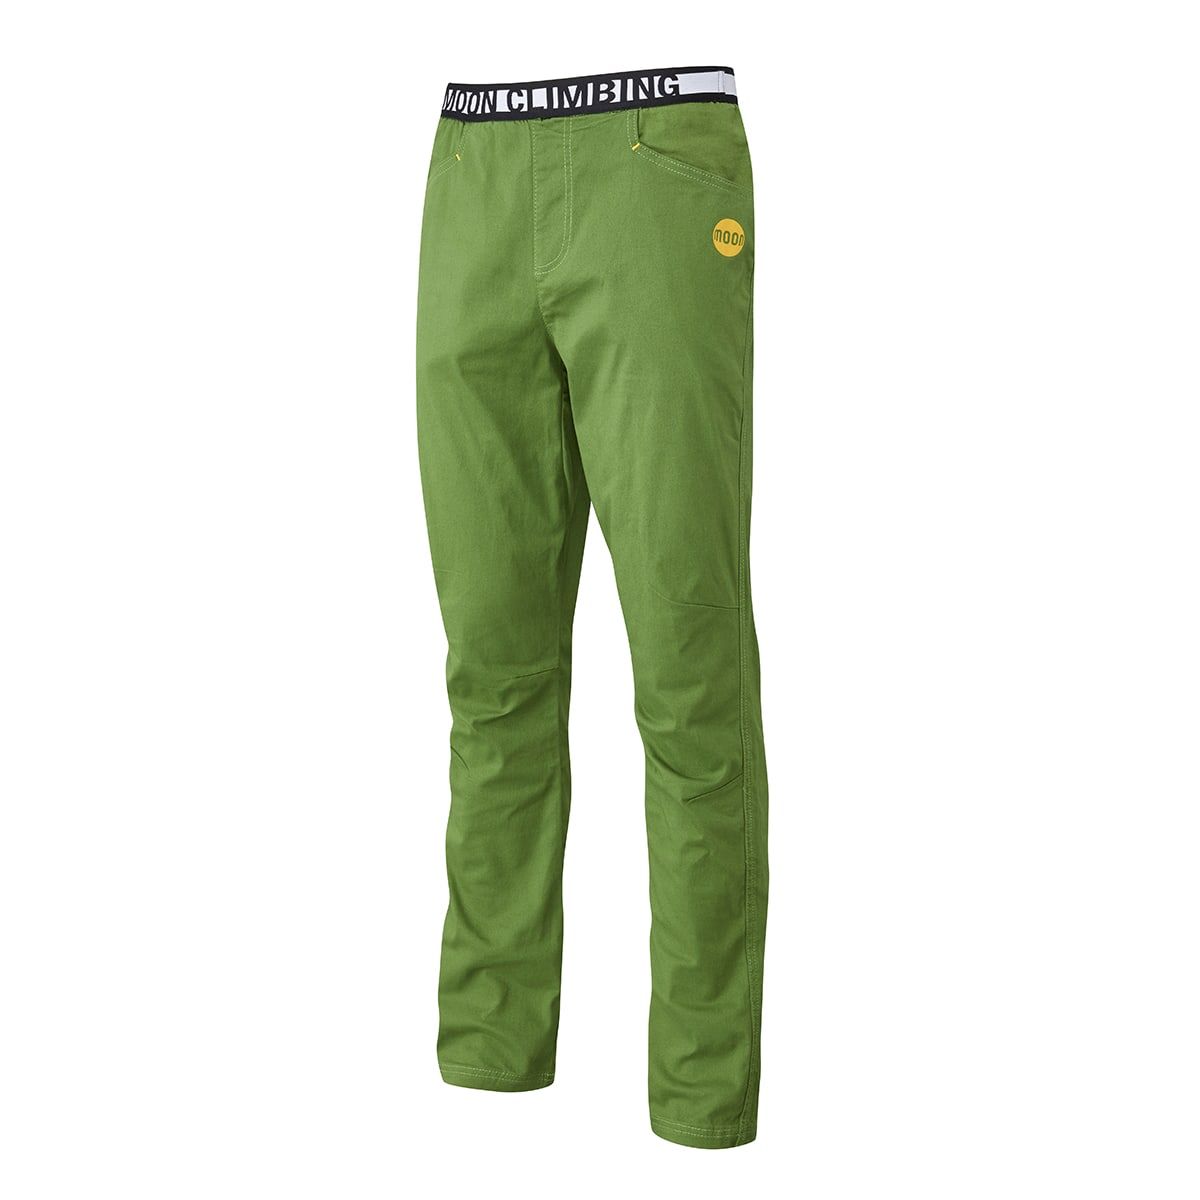 Men's Jura Pant - Only Nuts